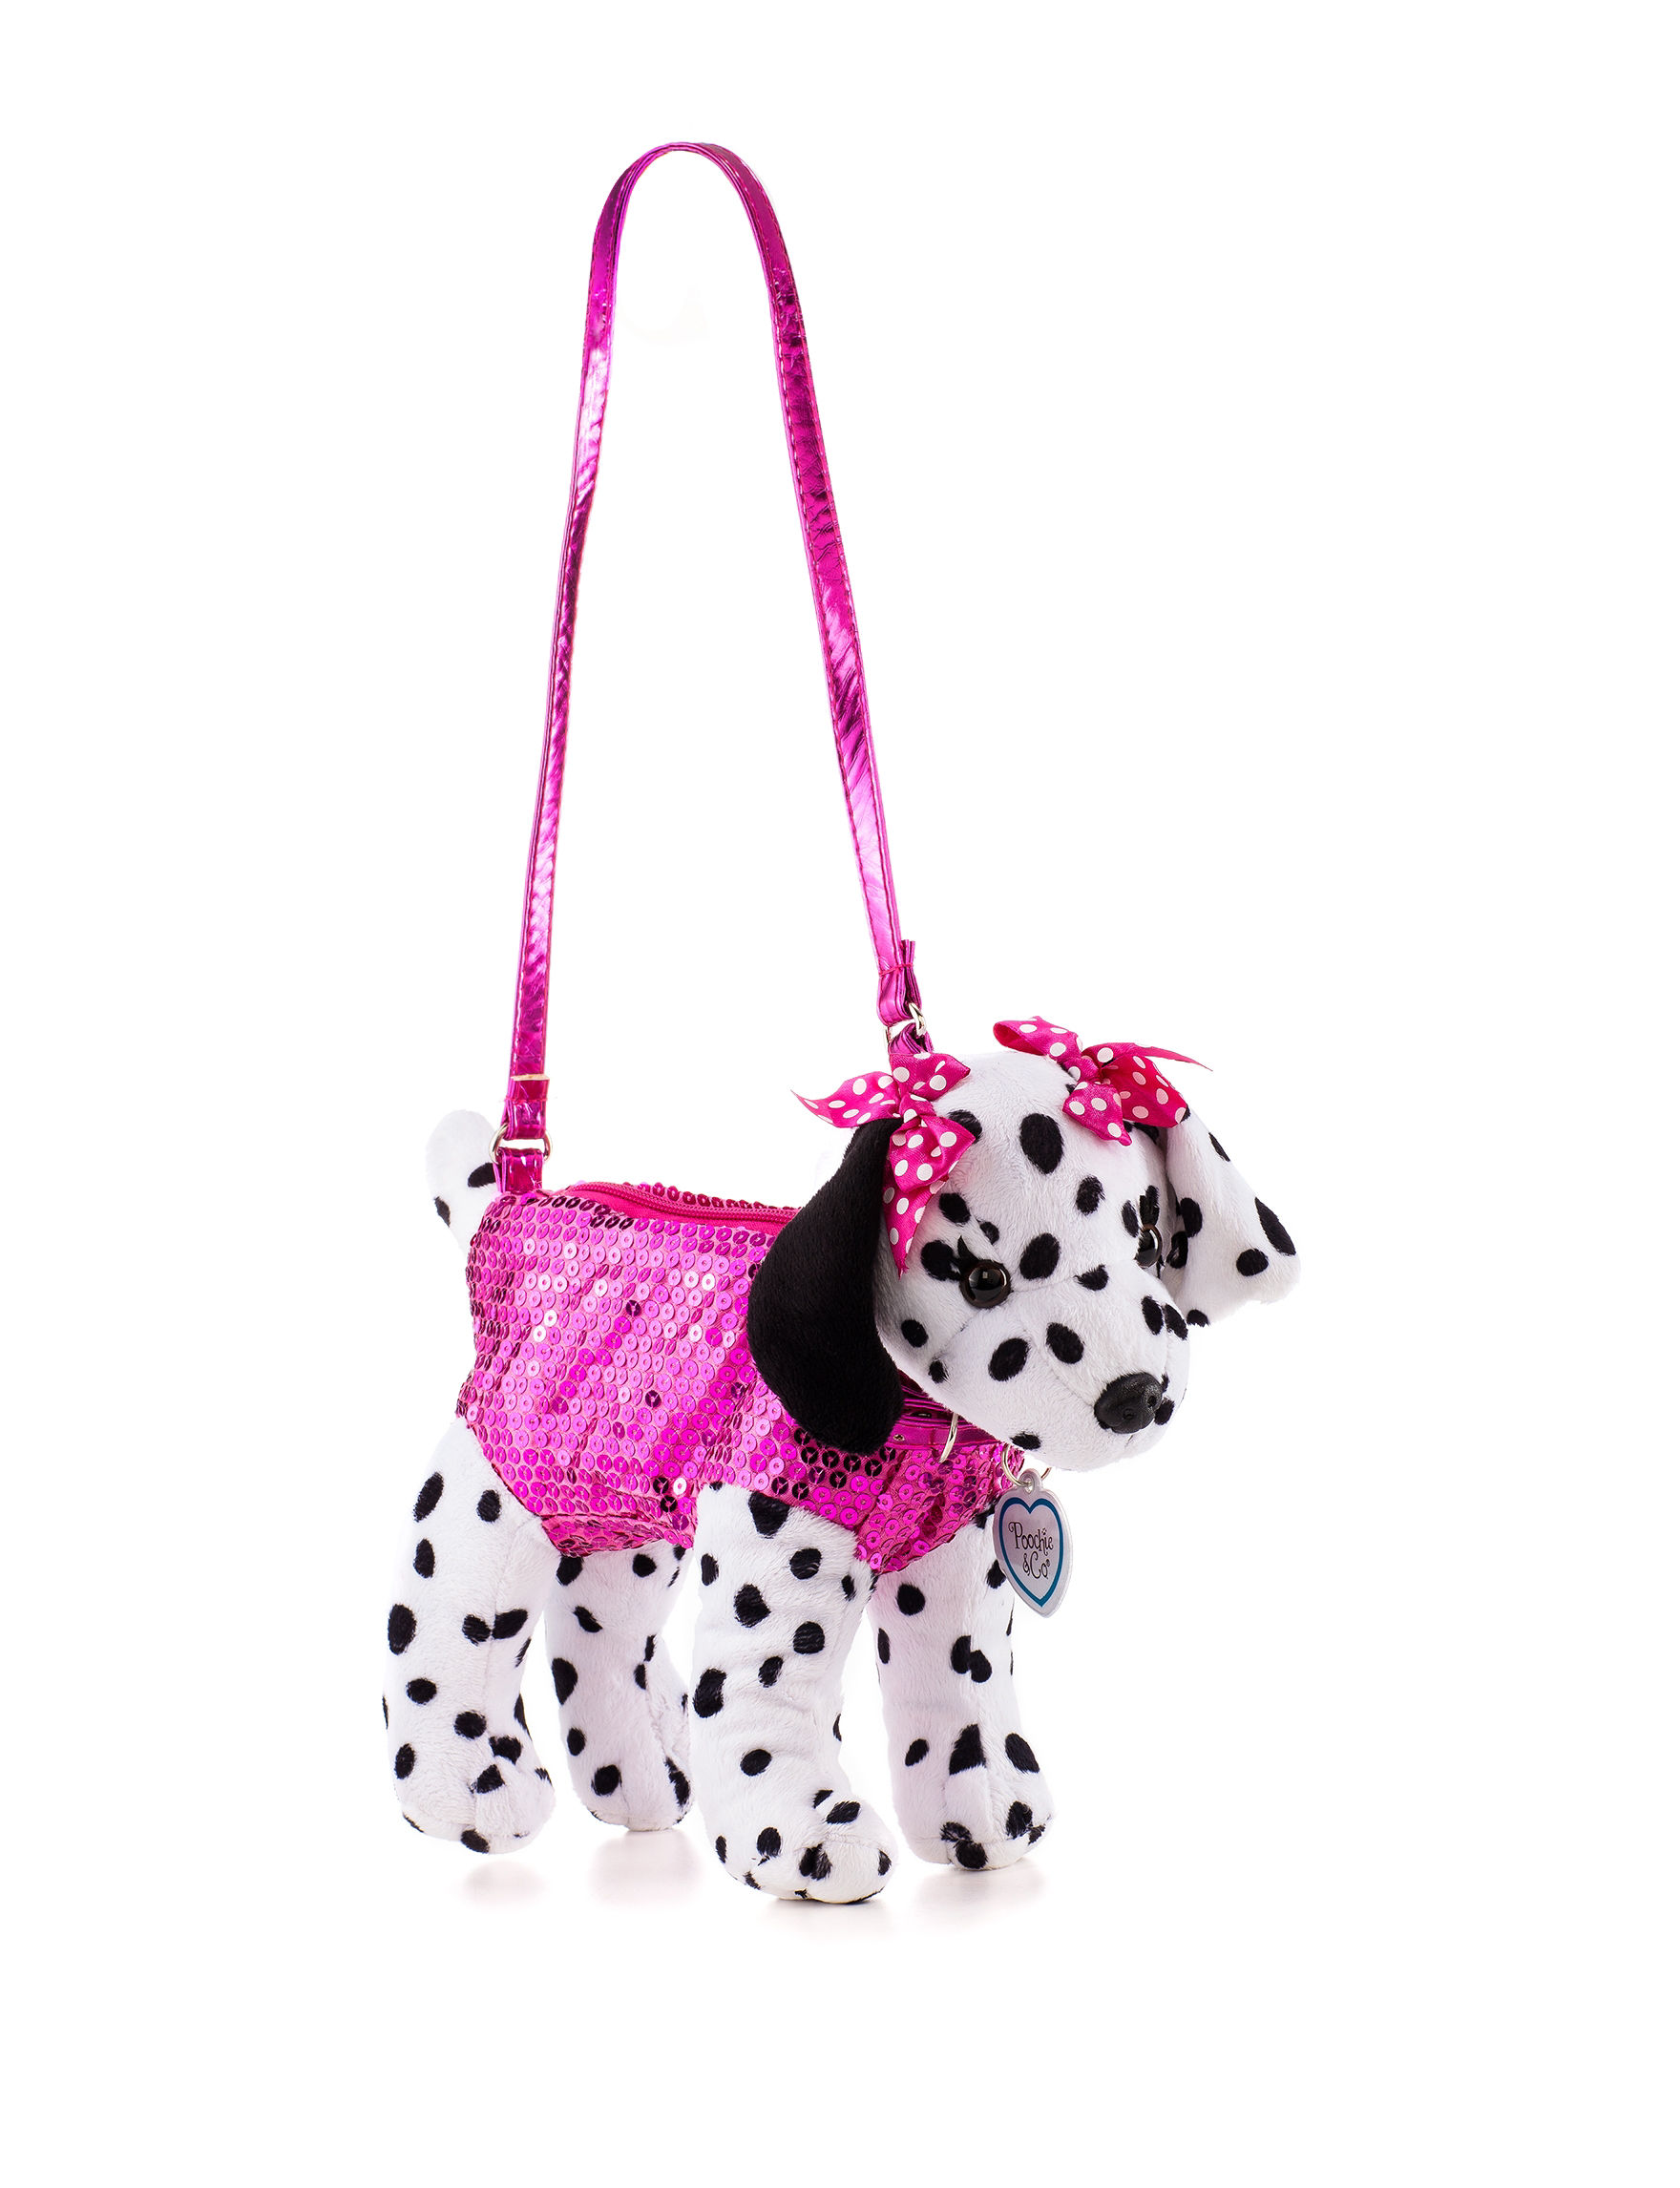 UPC 632878190943 product image for Poochie & Co Dalmatian Sparkly Dog Bag - Girls - Pink - Poochie & Co. | upcitemdb.com